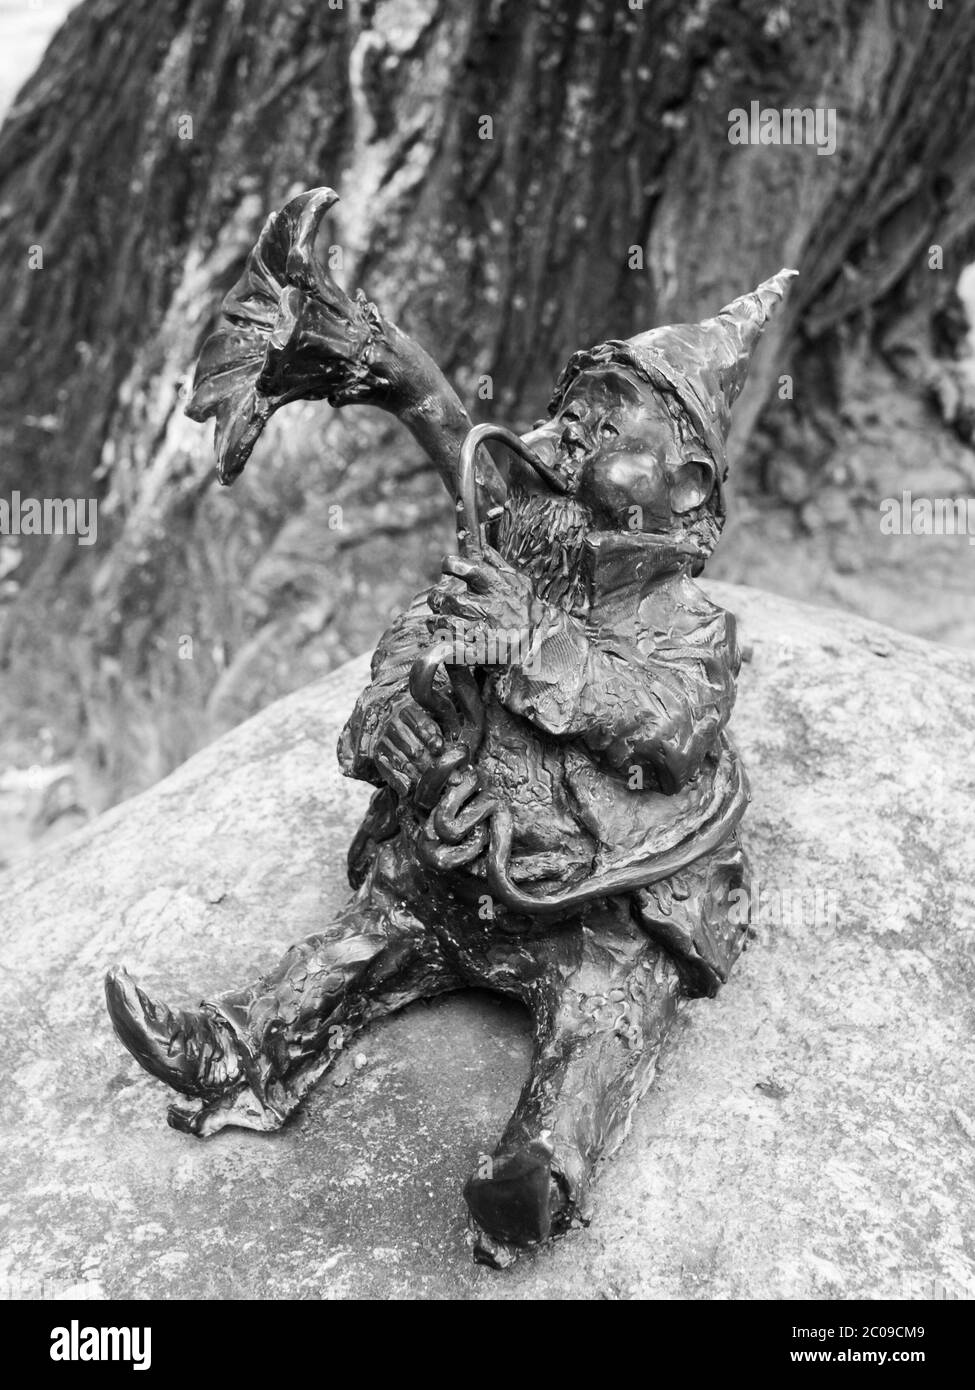 WROCLAW, POLAND - CIRCA 2014: Dwarf playing trombone in Wroclaw botanical garden, Poland, circa 2014. Dwarfs are small figurines hidden on different places in Wroclaw. Black and white image. Stock Photo